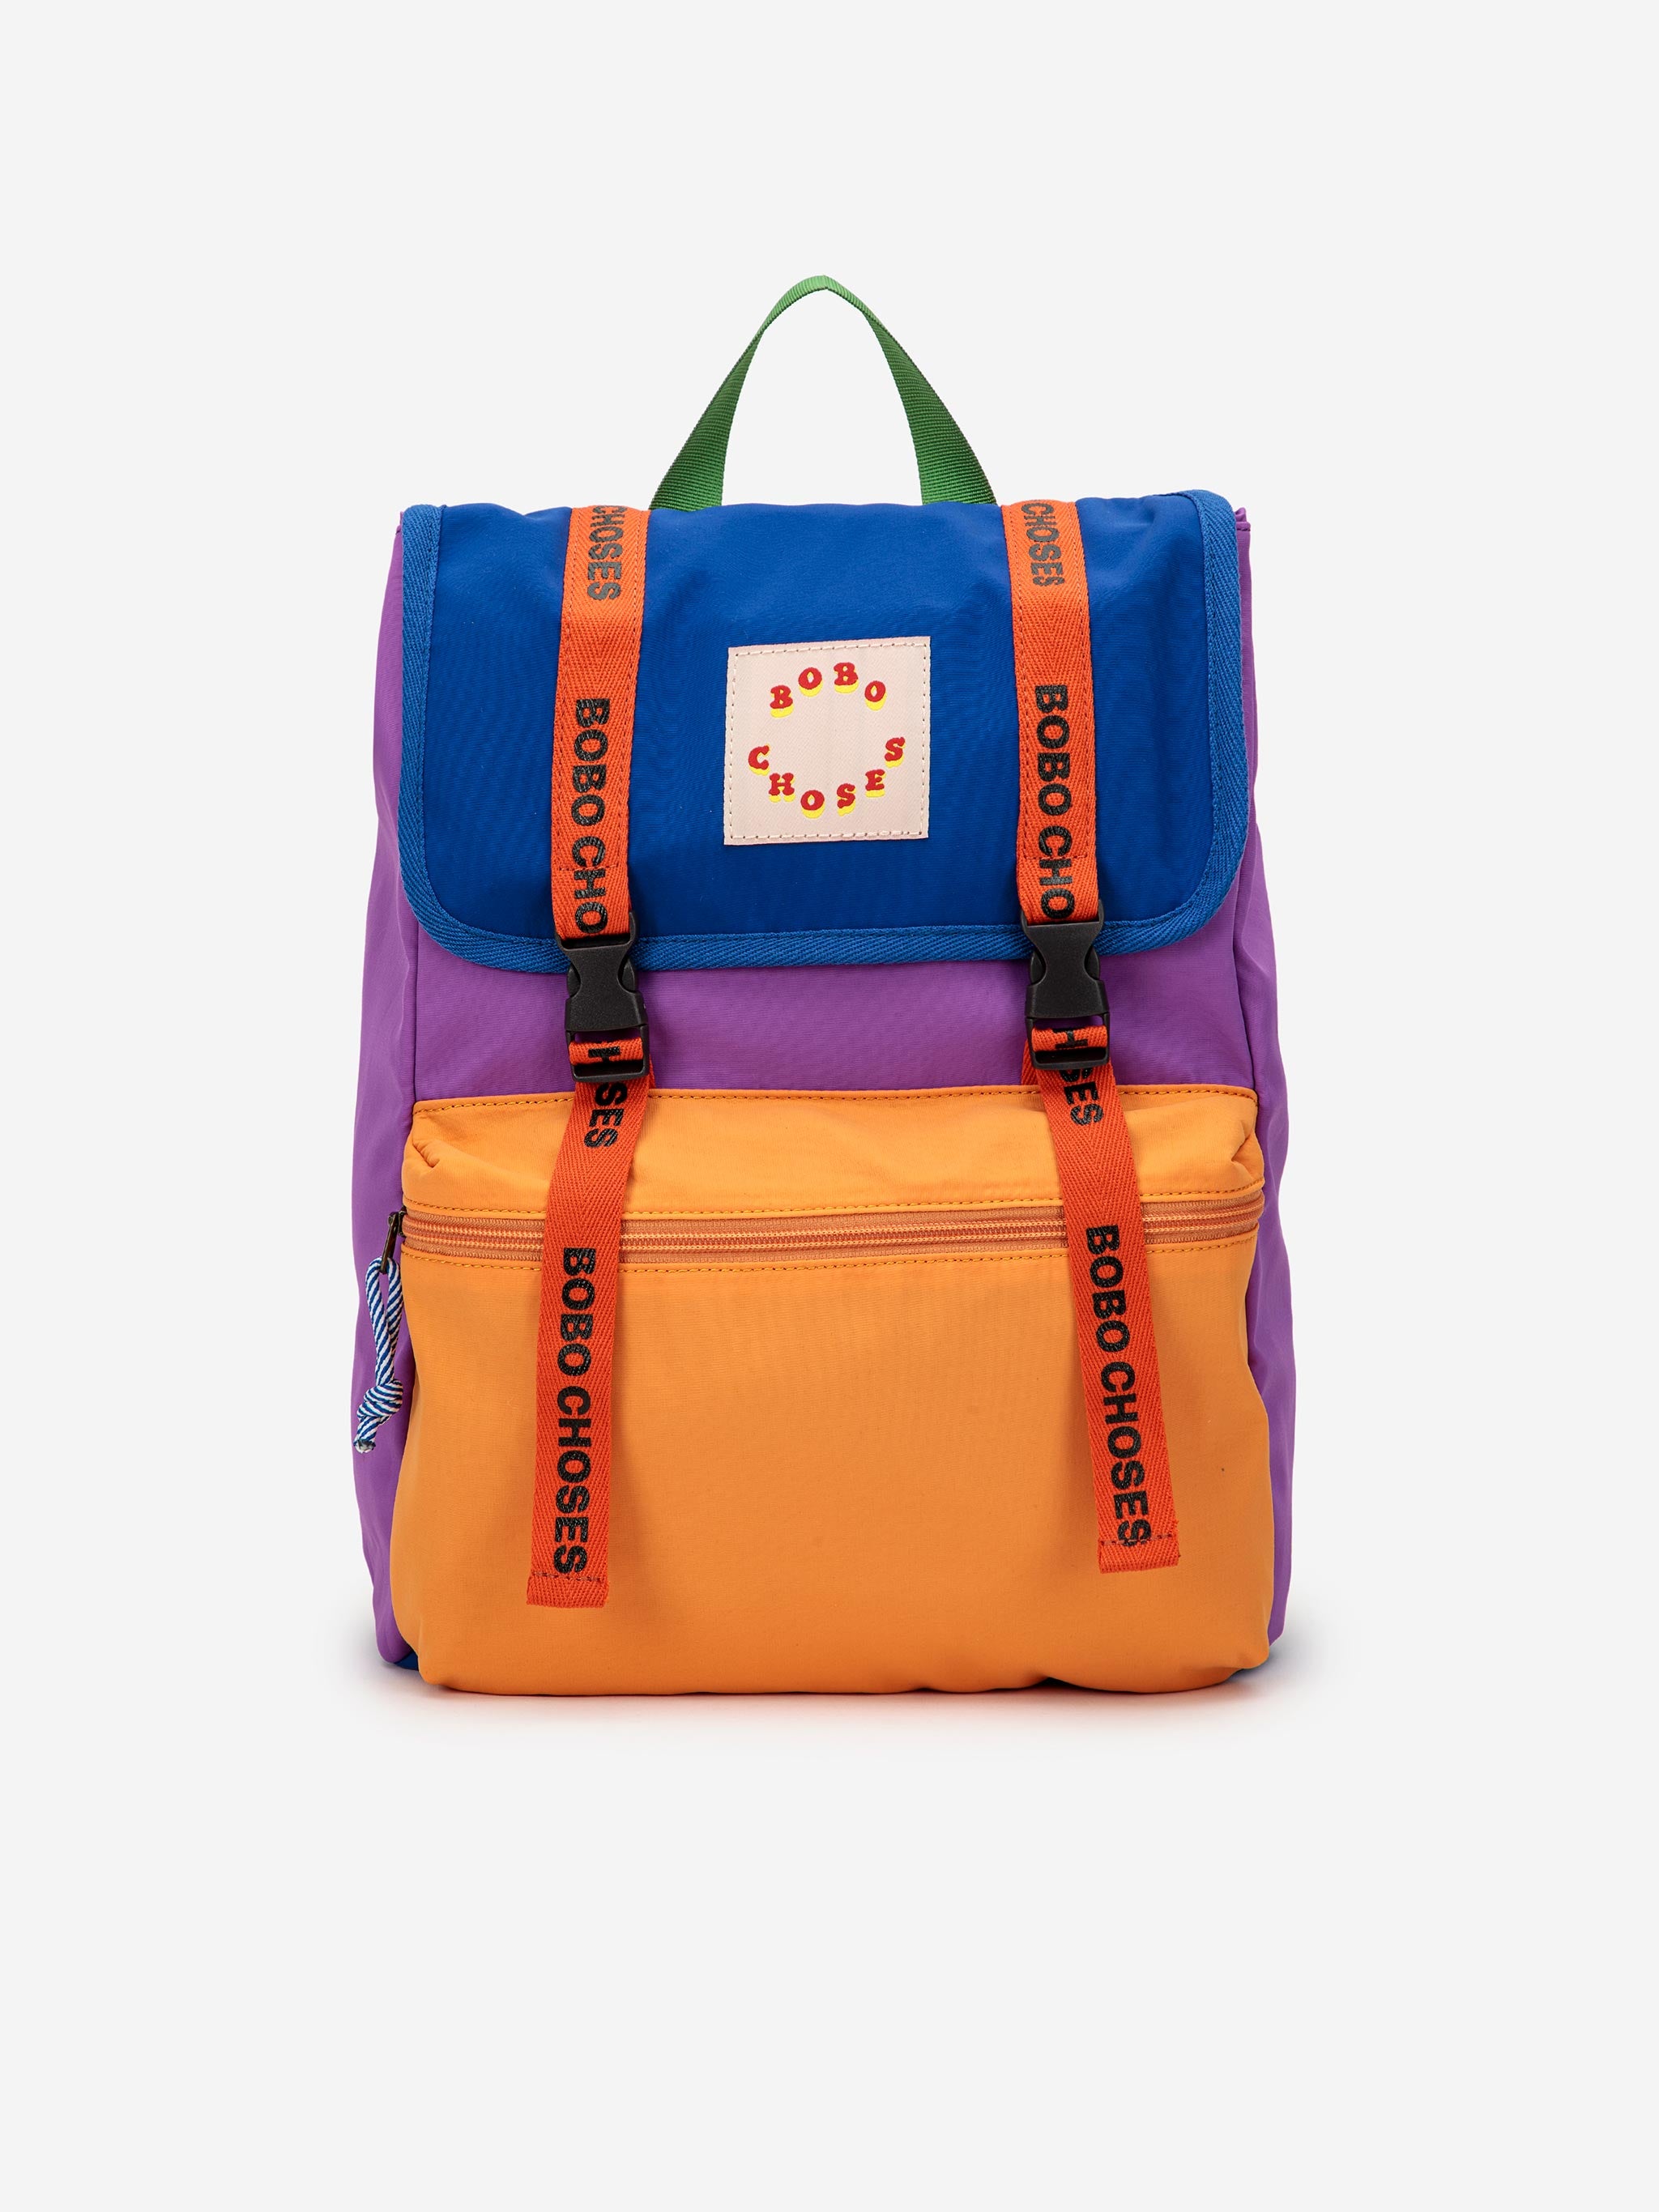 Backpacks, Bags and Cases for Children | Bobo Choses